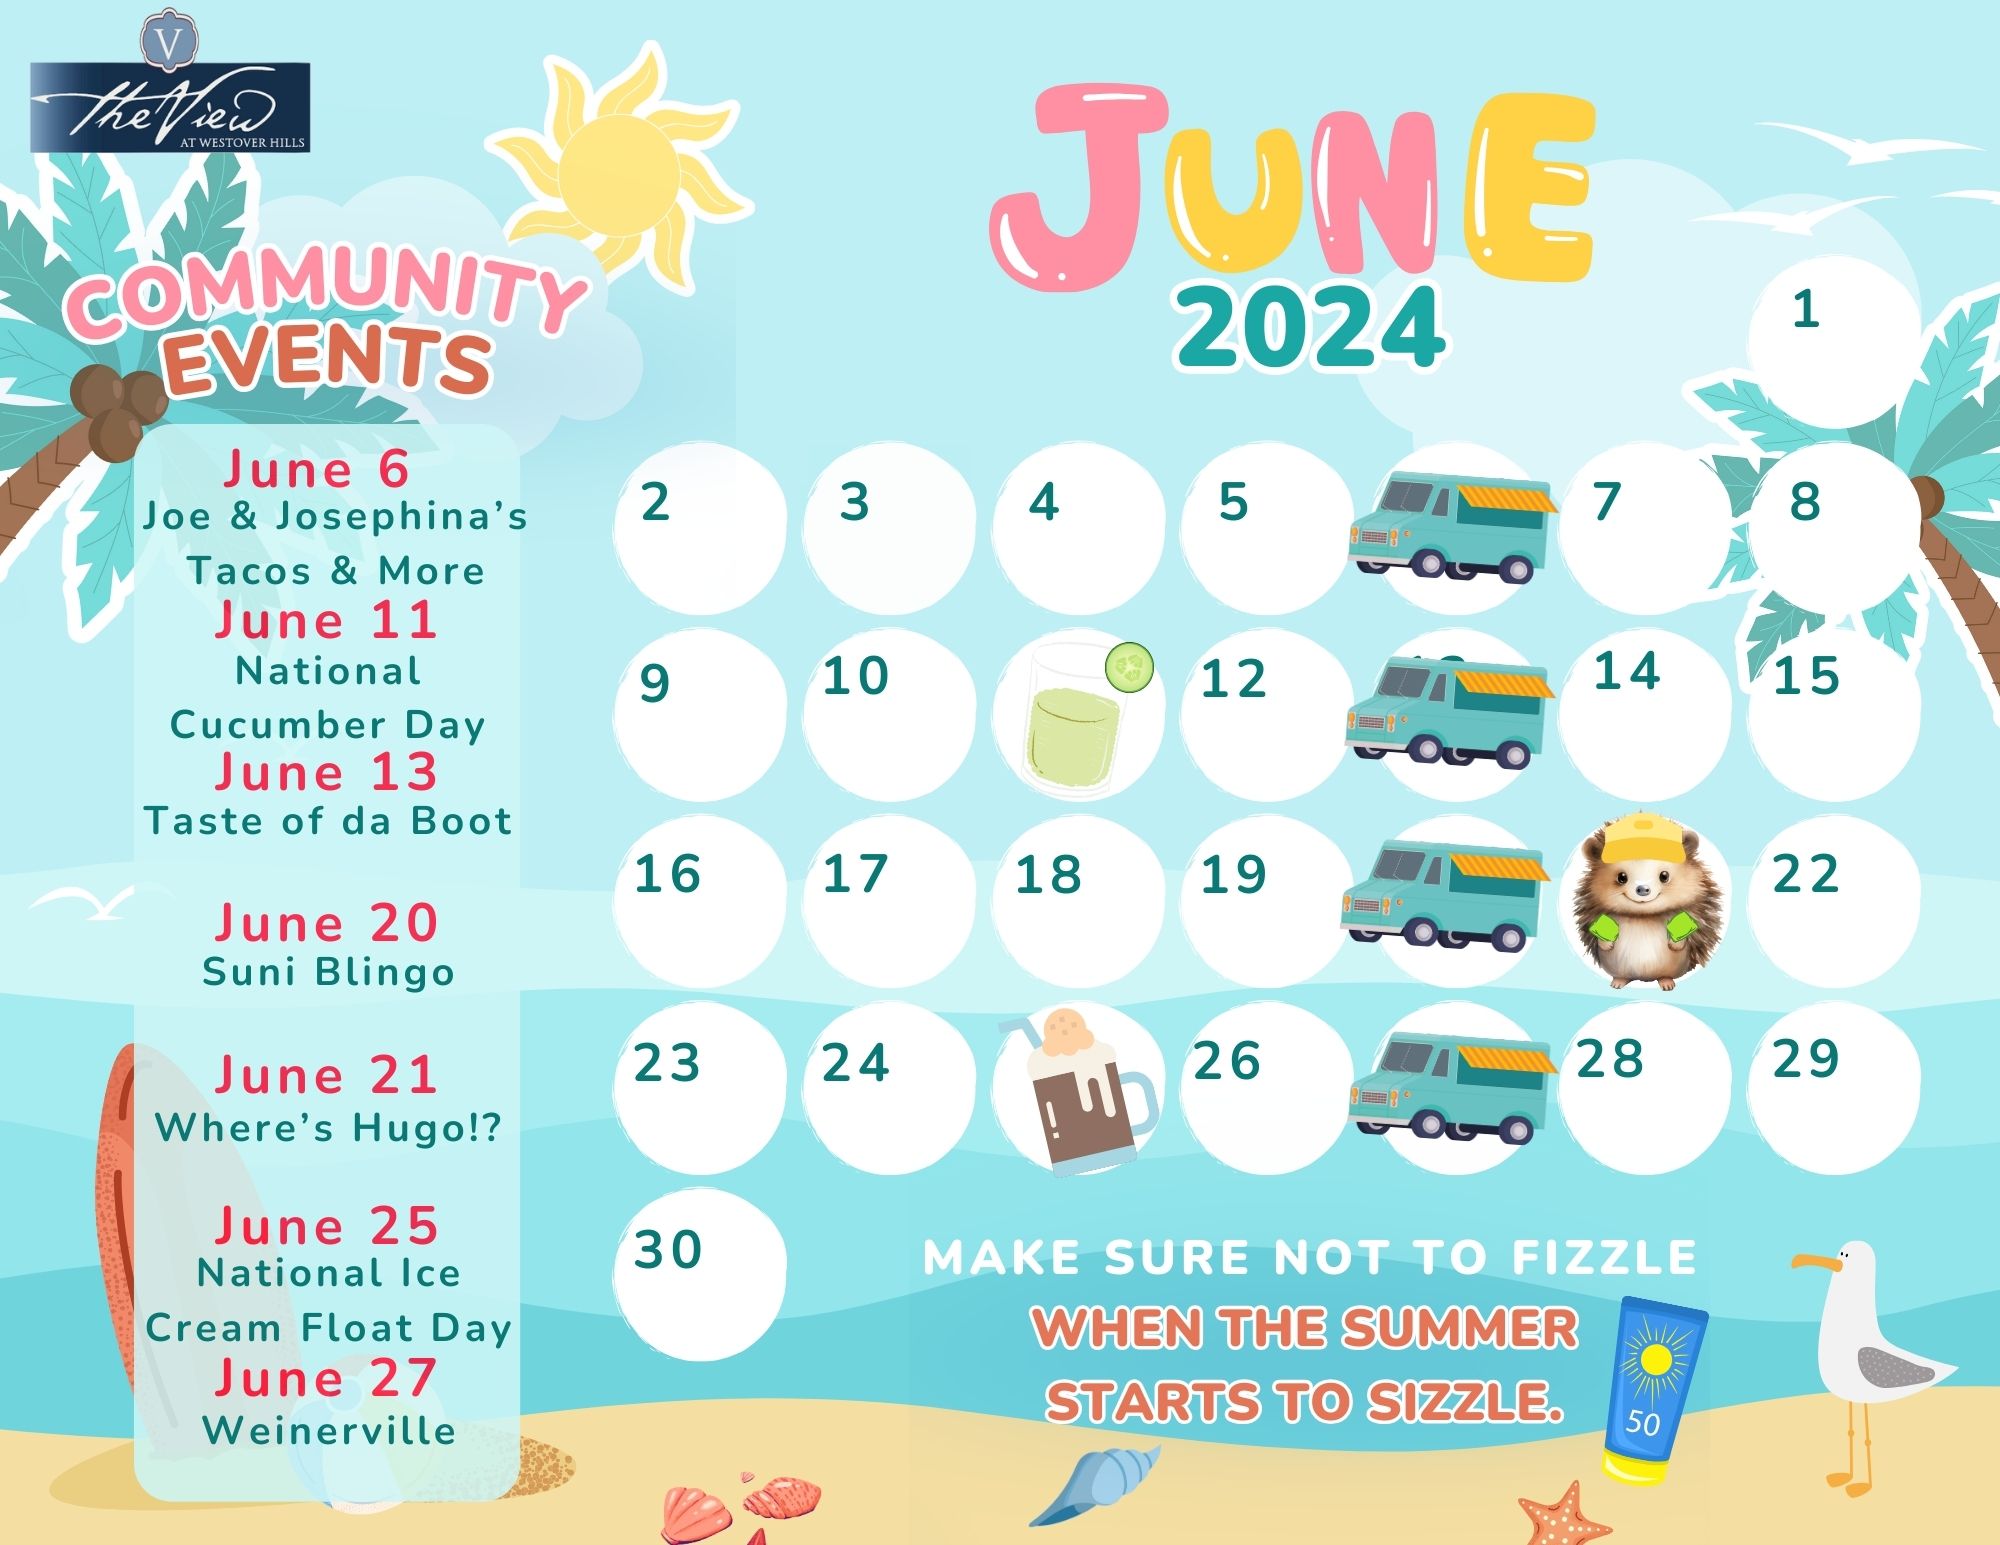 Apartments in Northwest San Antonio The June 2024 event calendar with community activities listed. Decorations include a sun, sunglasses, and beach items. Reminder text: "Make sure not to fizzle when the summer starts to sizzle." Keep track with your June Planner! The View At Westover Hills Apartments in Northwest San Antonio 3010 West Loop 1604 N San Antonio, TX 78251 p: (210) 672-4924 f: (210) 680-6404